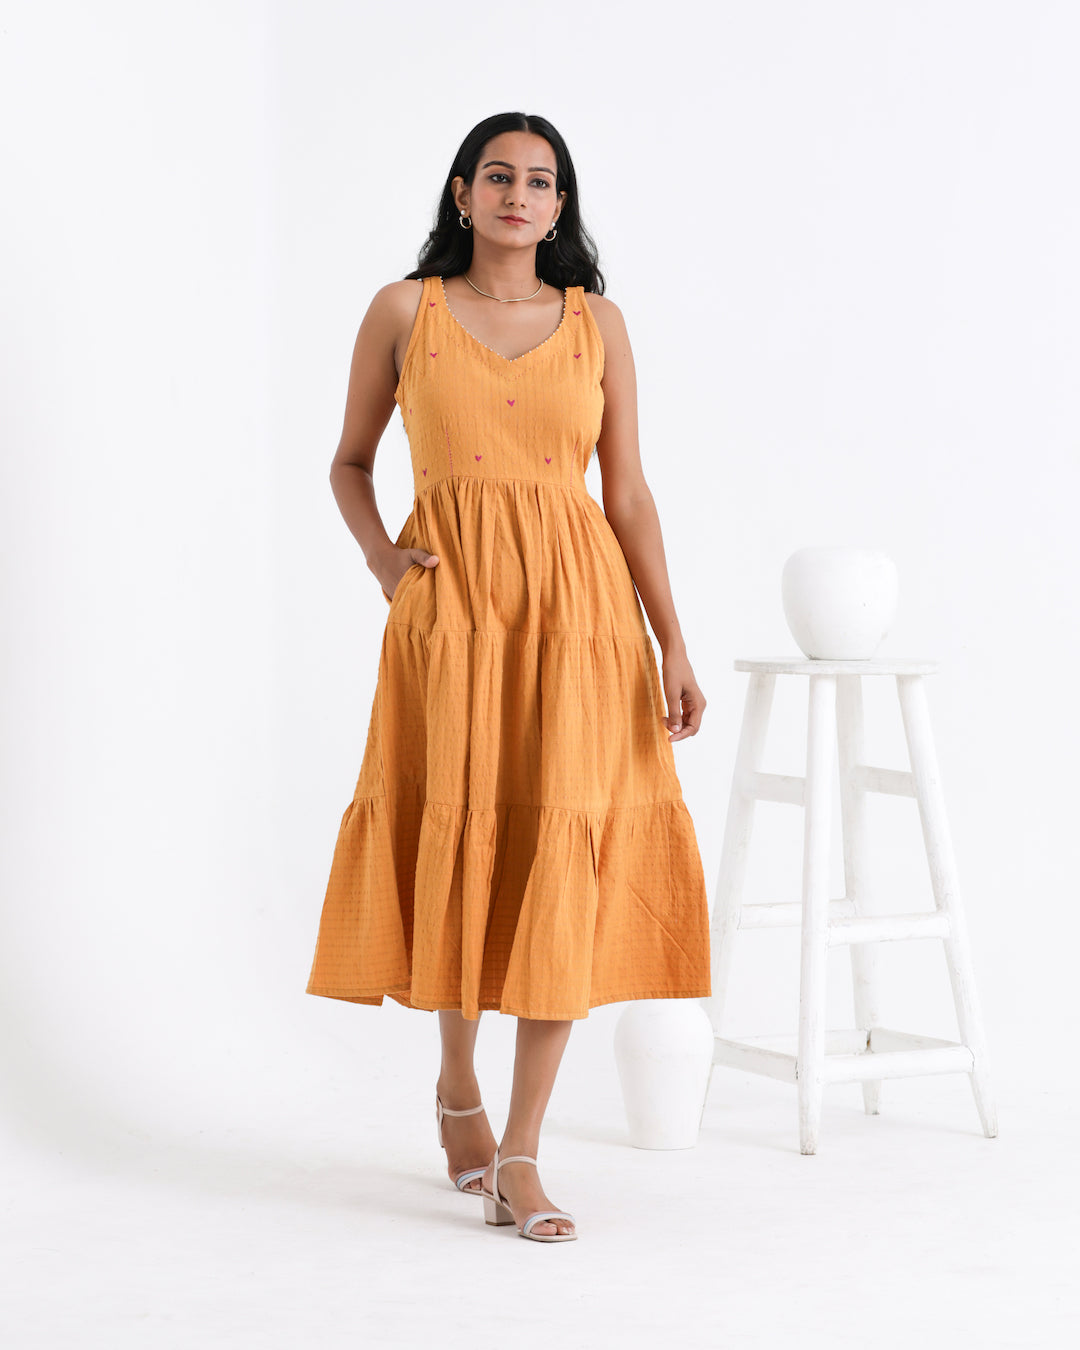 Shop yellow embroidered dress for Diwali from bebaak